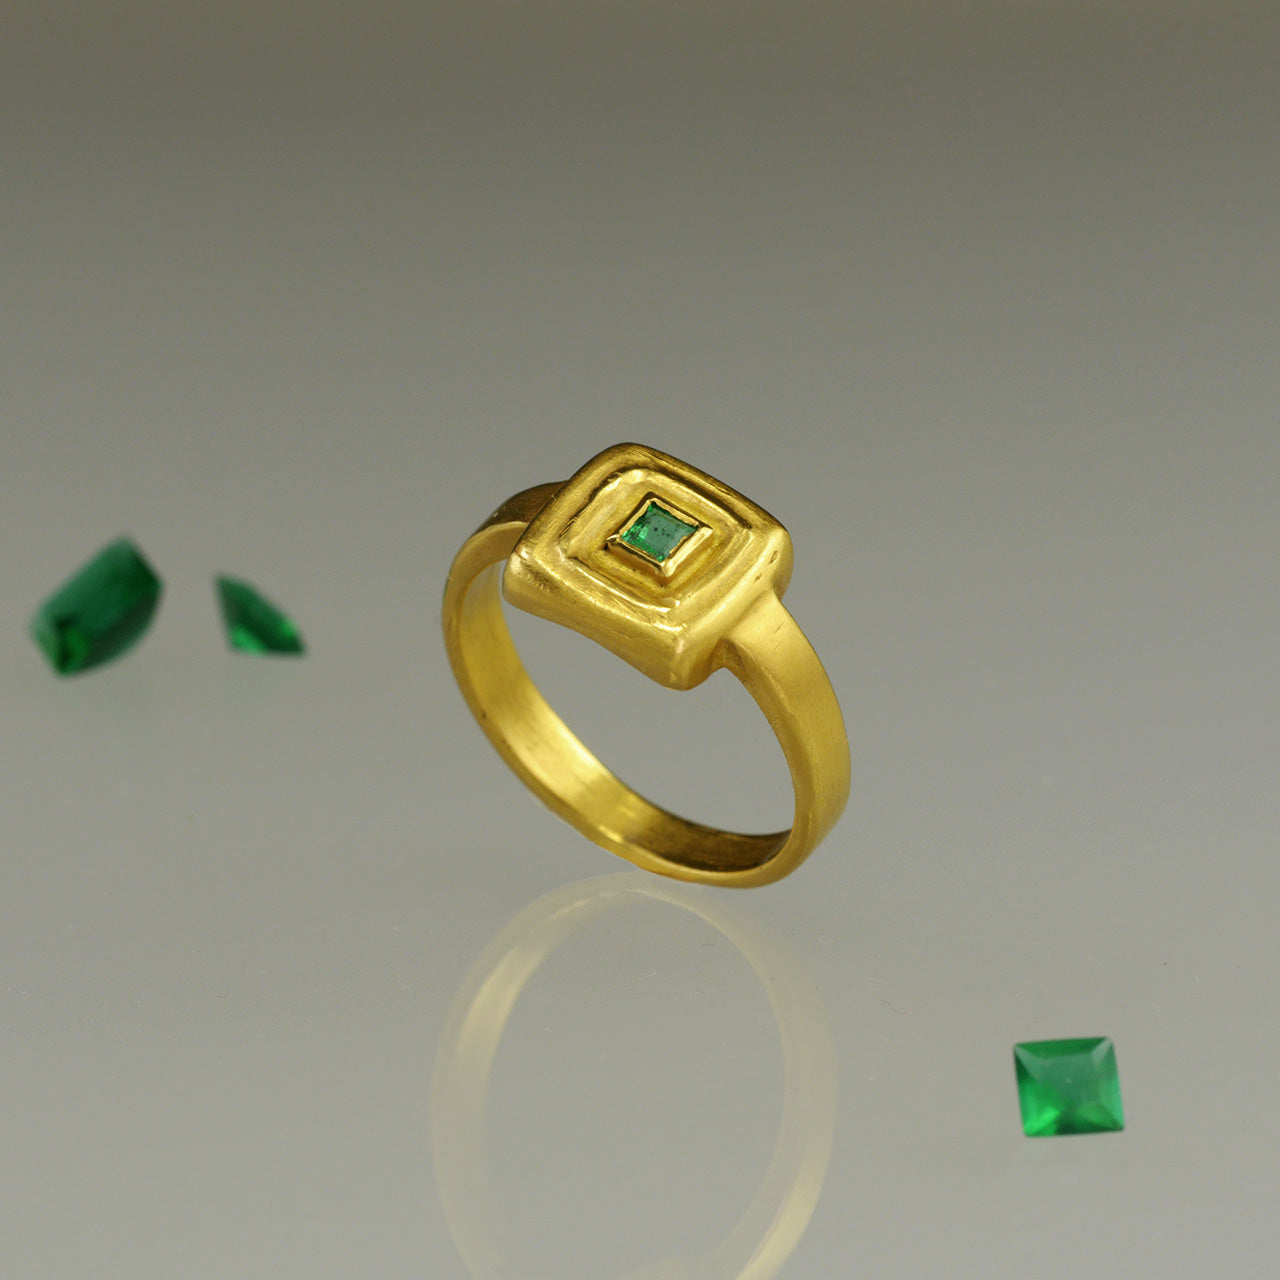 Top view of Handcrafted 18k Gold ring featuring a square Emerald set atop a square surface, evoking the ancient Egyptian era's golden jewelry of the Pharaohs.